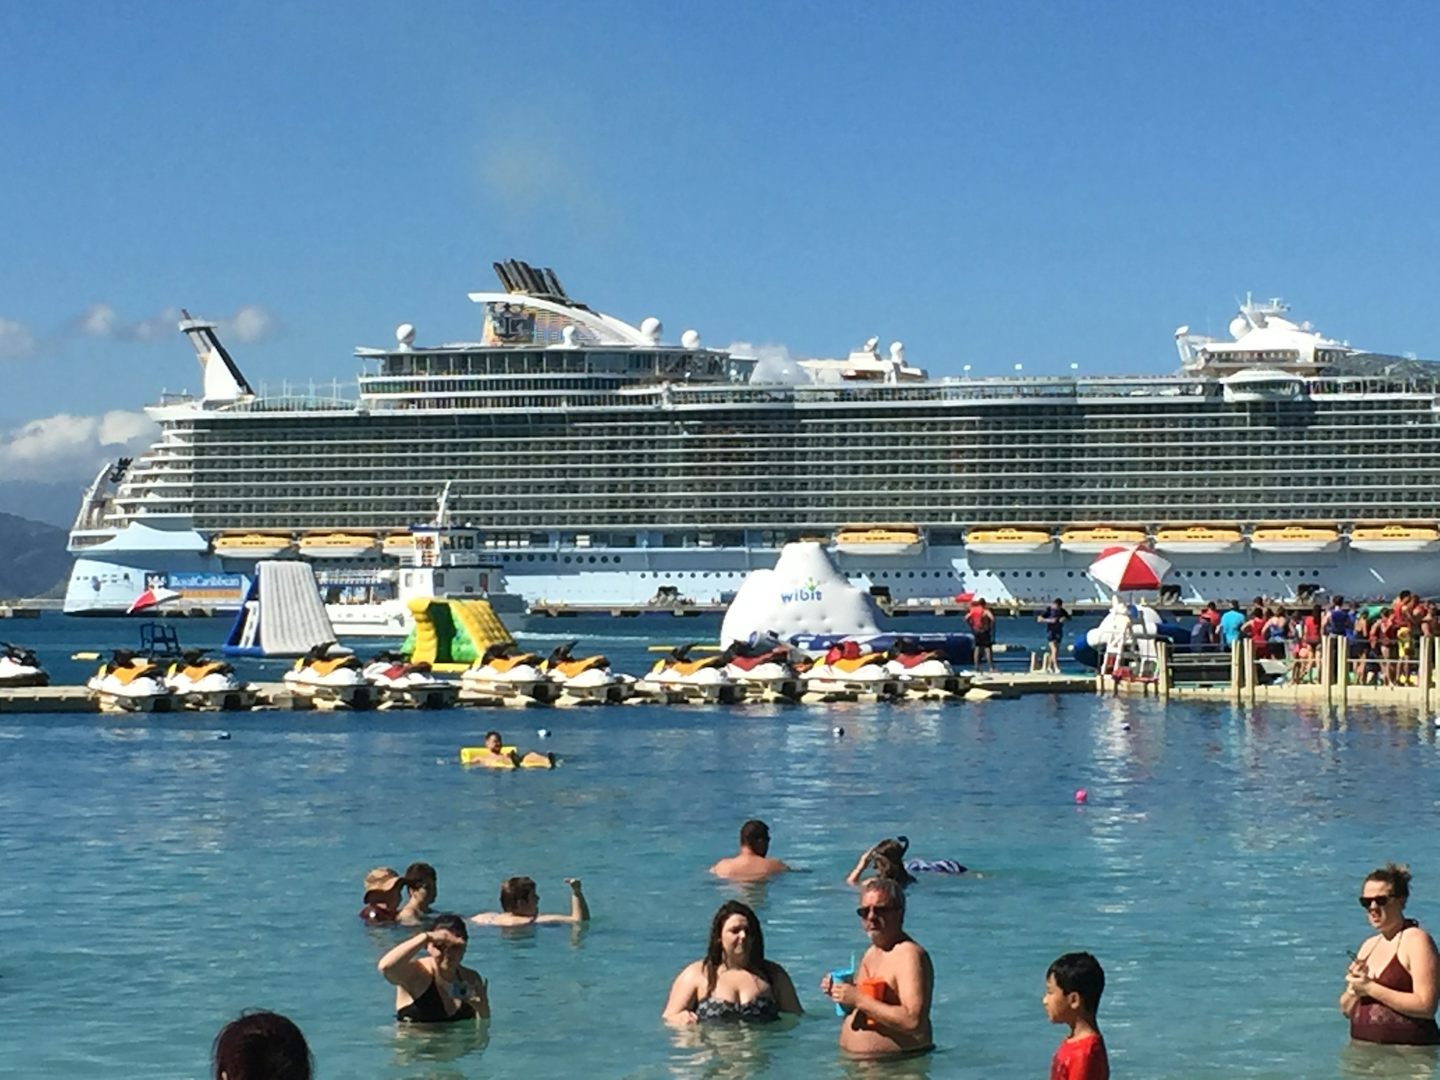 The ship from the beach in Labadee.